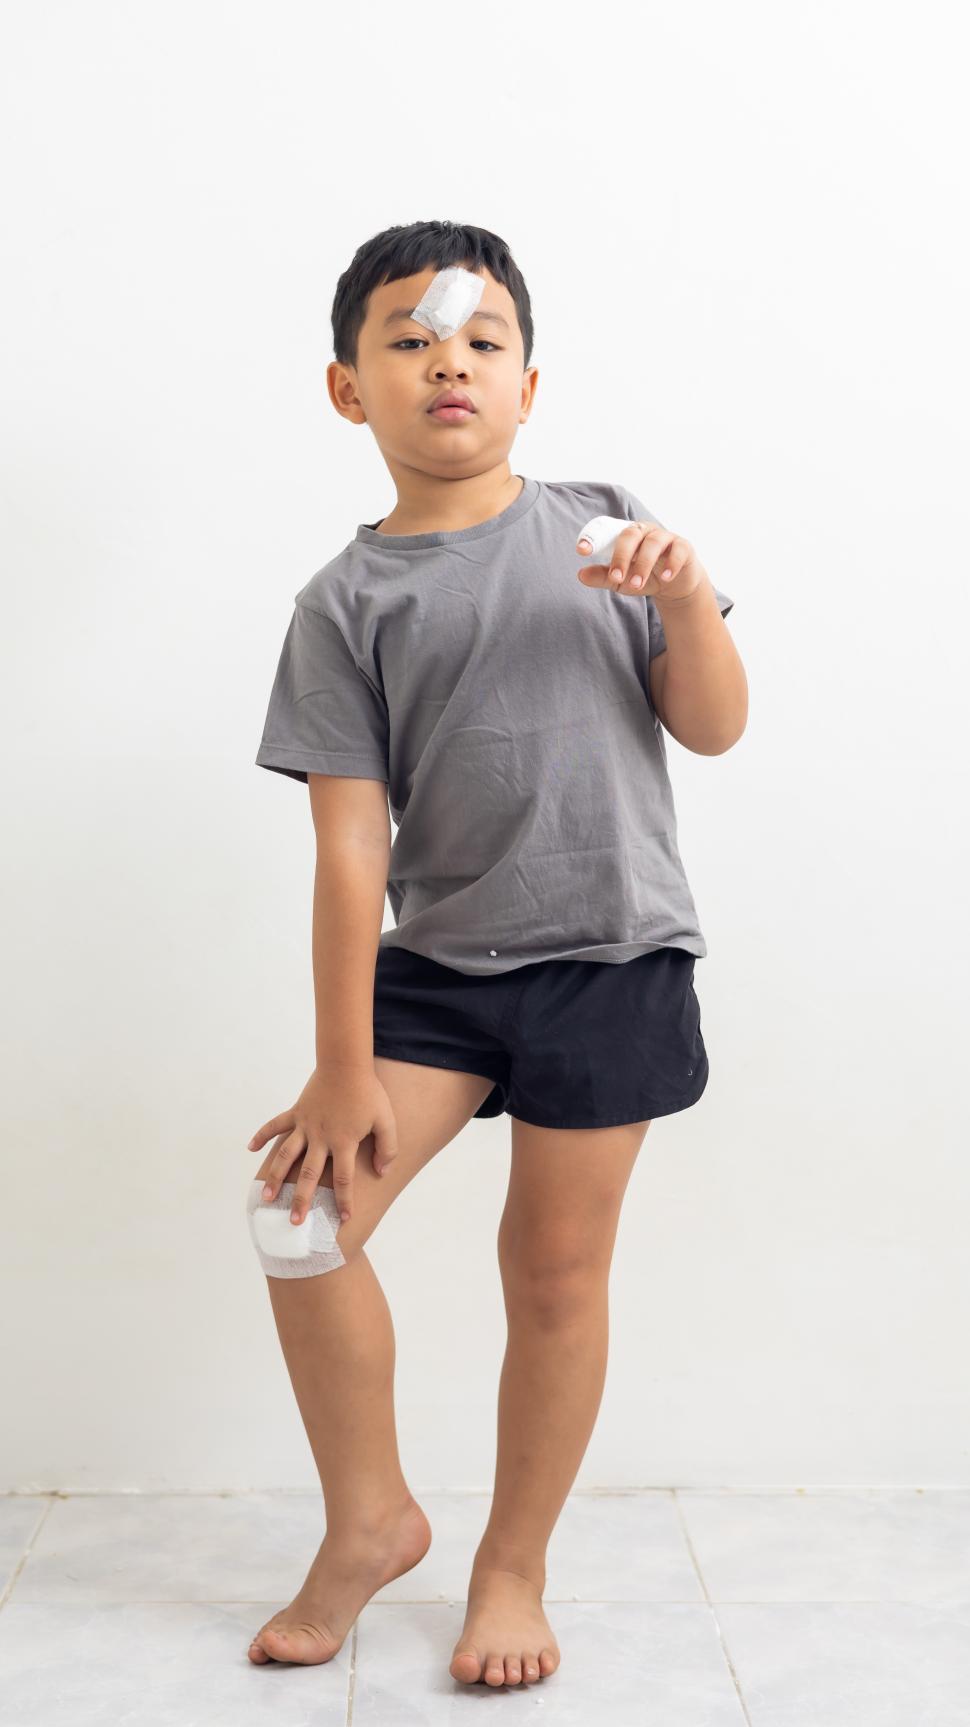 Free Image of Young boy with minor injuries 